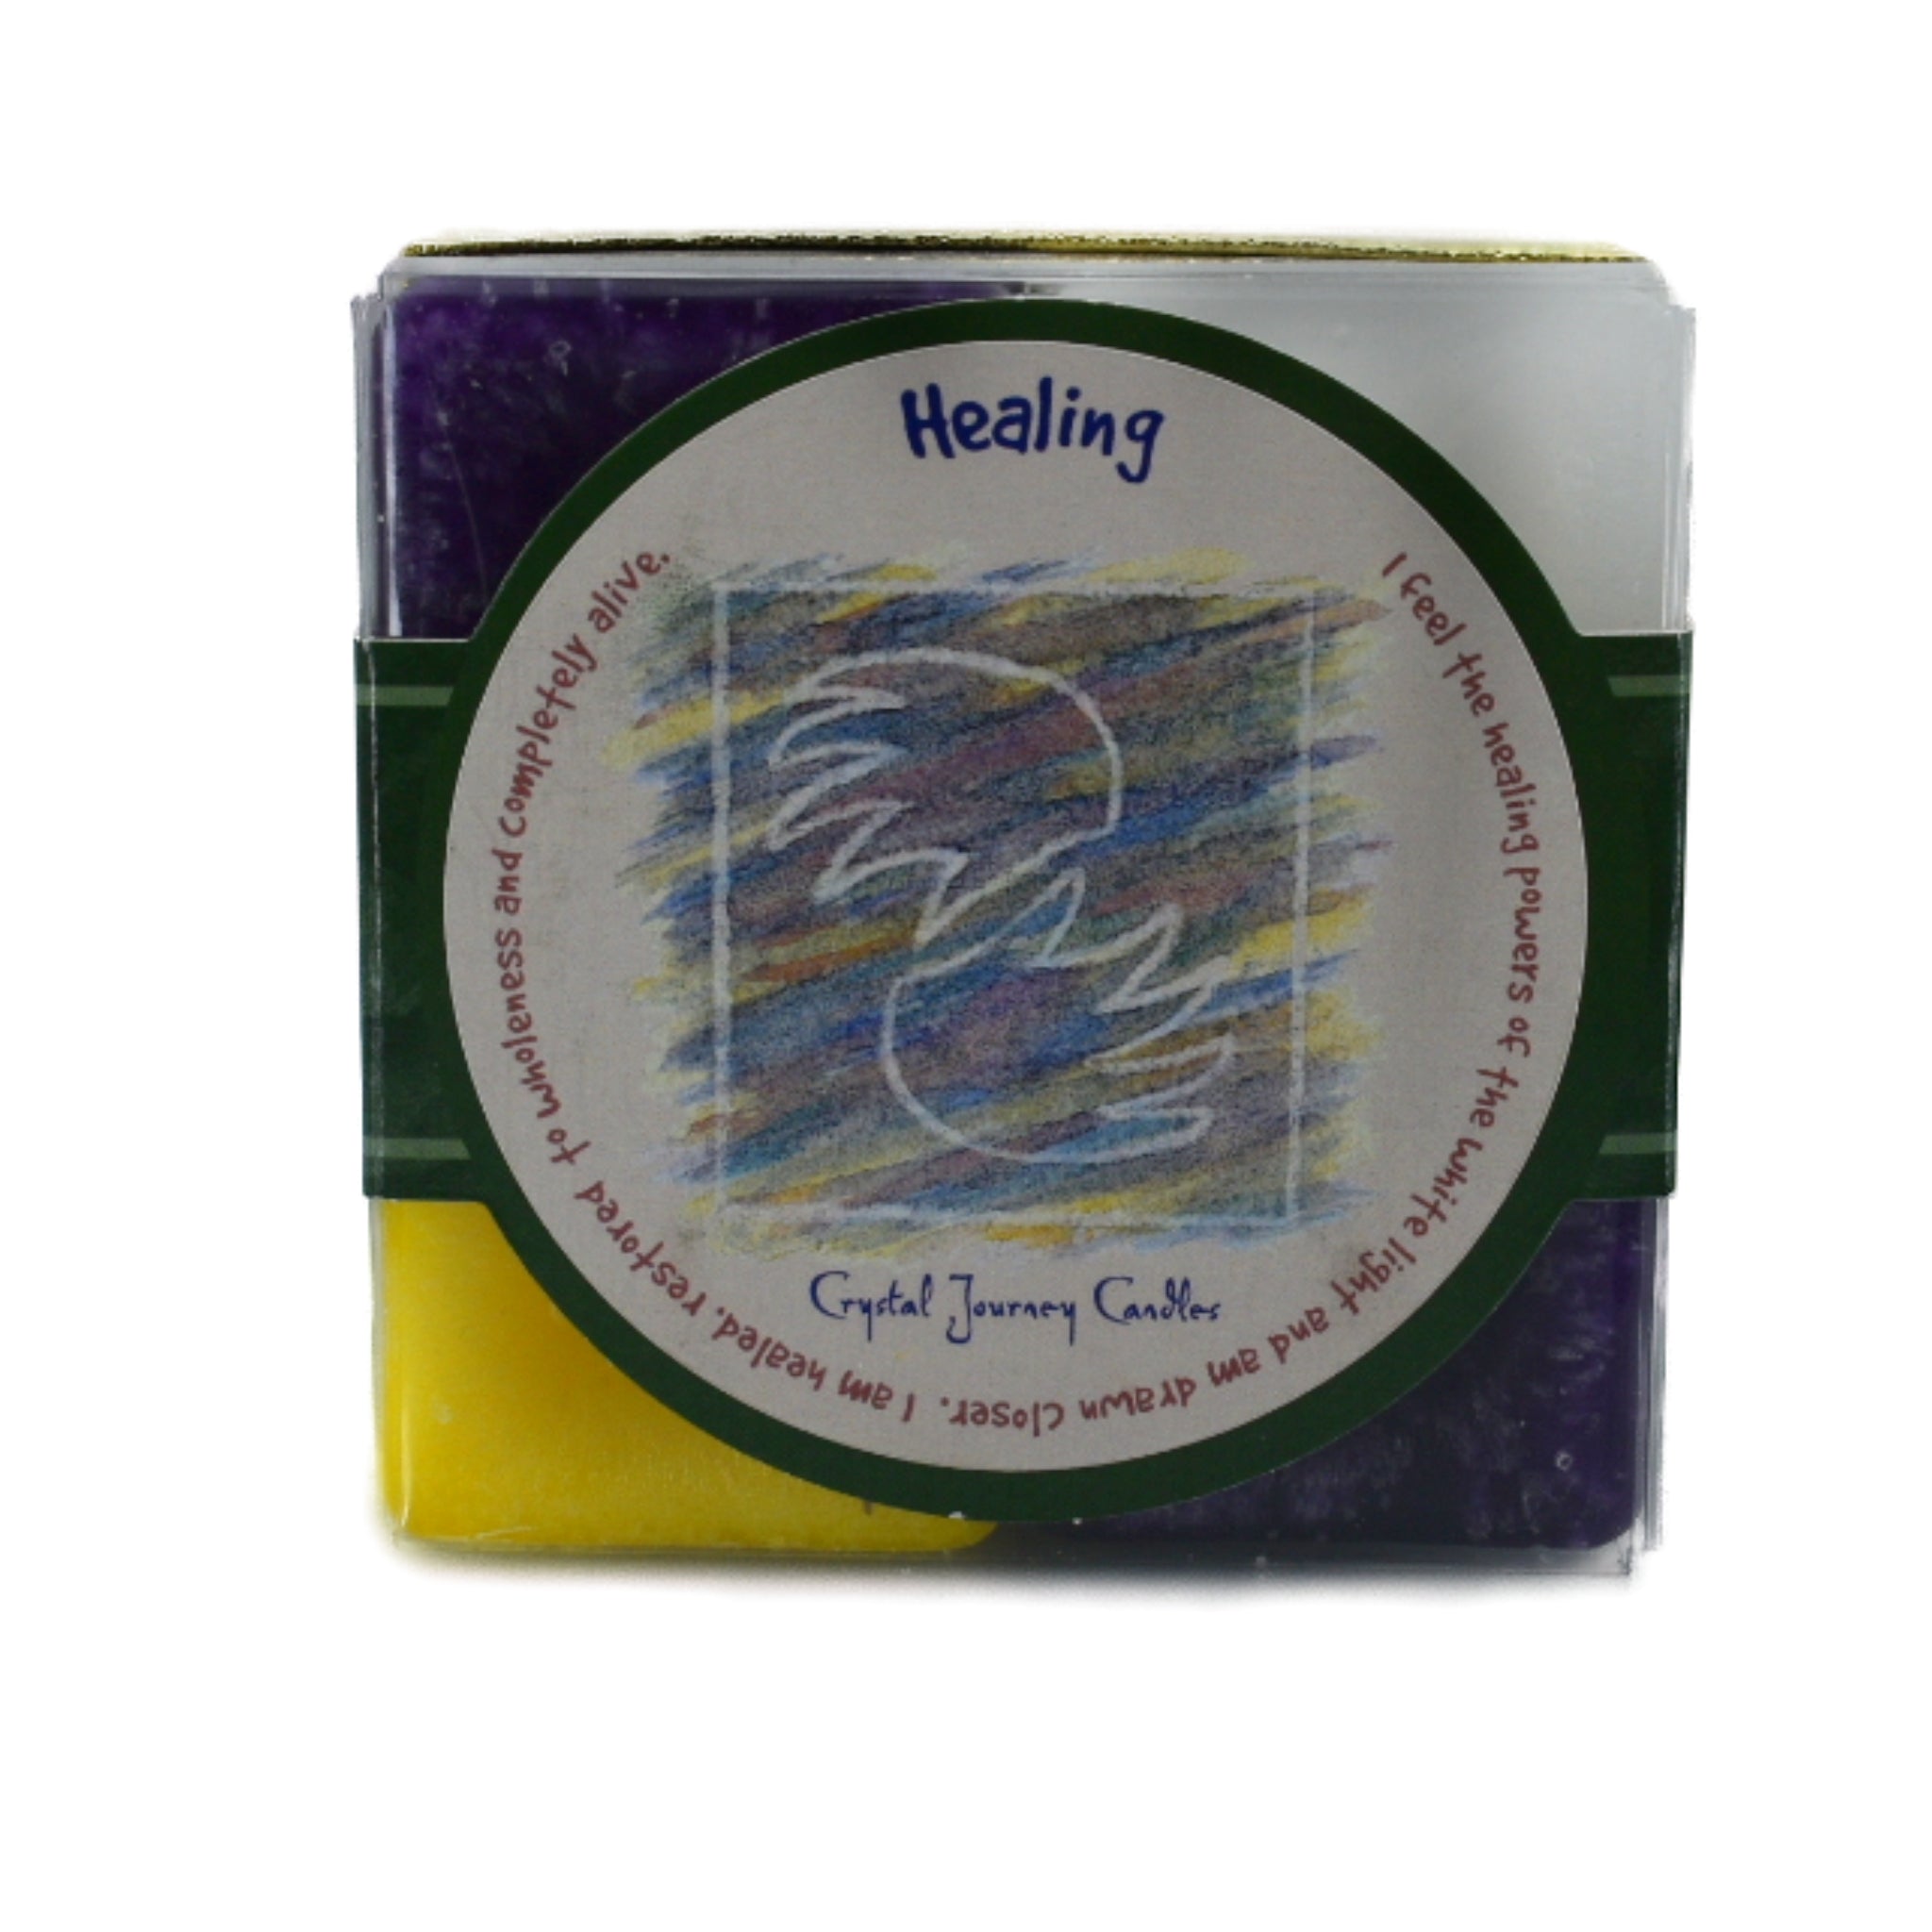 Healing Square Pack Candle.  Use to heal the body, mind, spirit, soul and positive energy.  Scented purple, yellow and white candles.